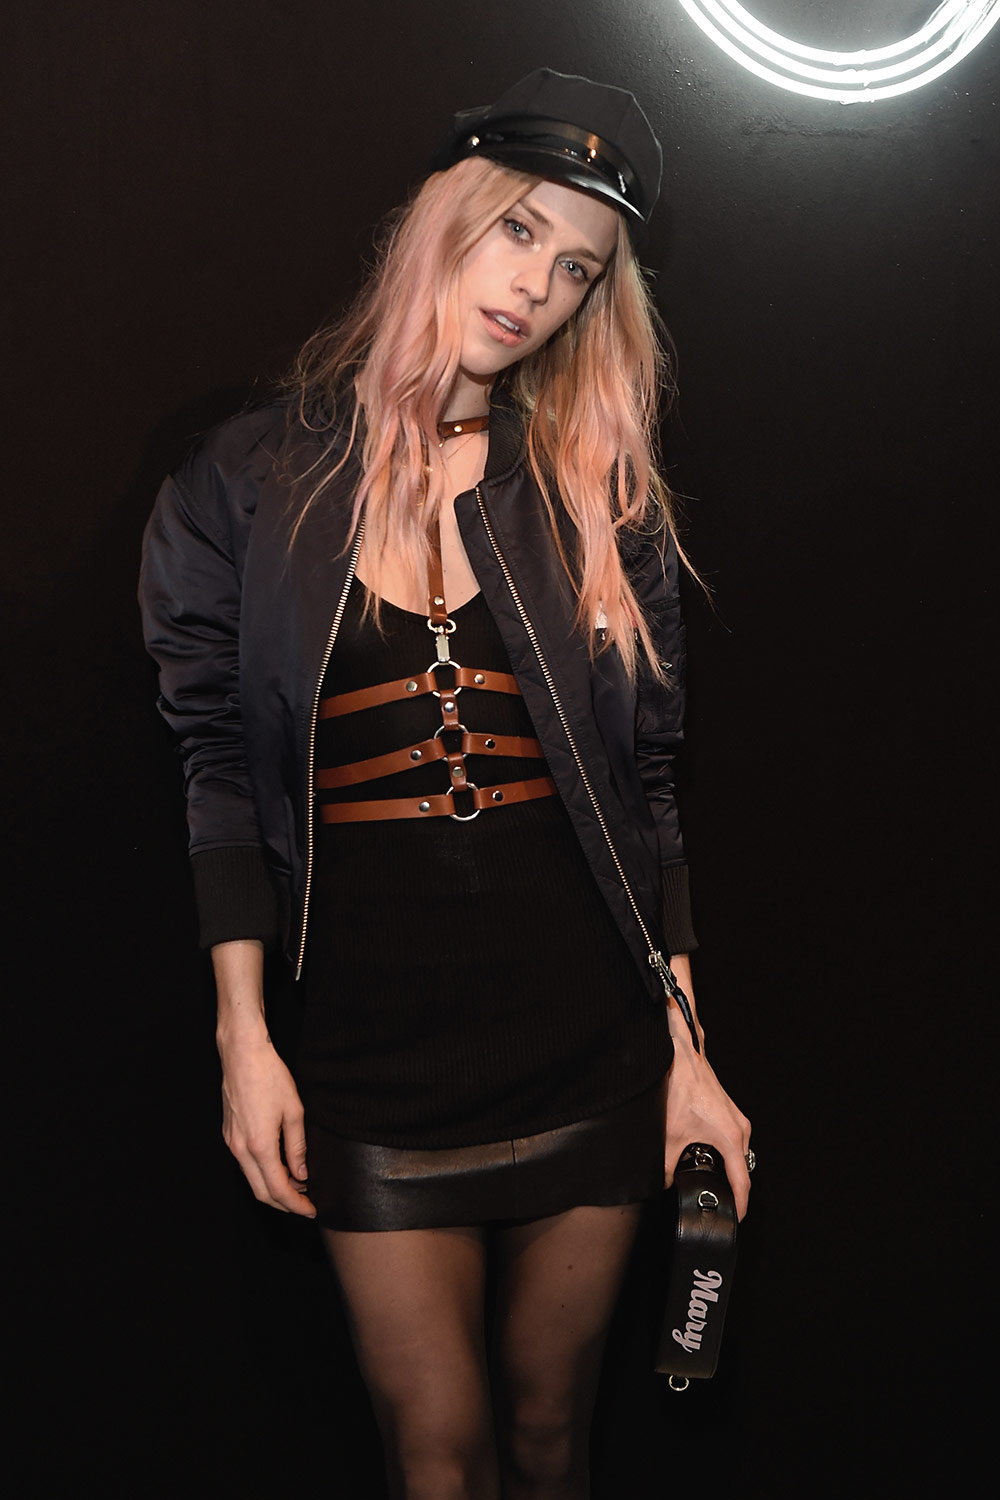 Mary Charteris attends the launch of the JF London x Kyle De’Volle fw 2017 capsule collection